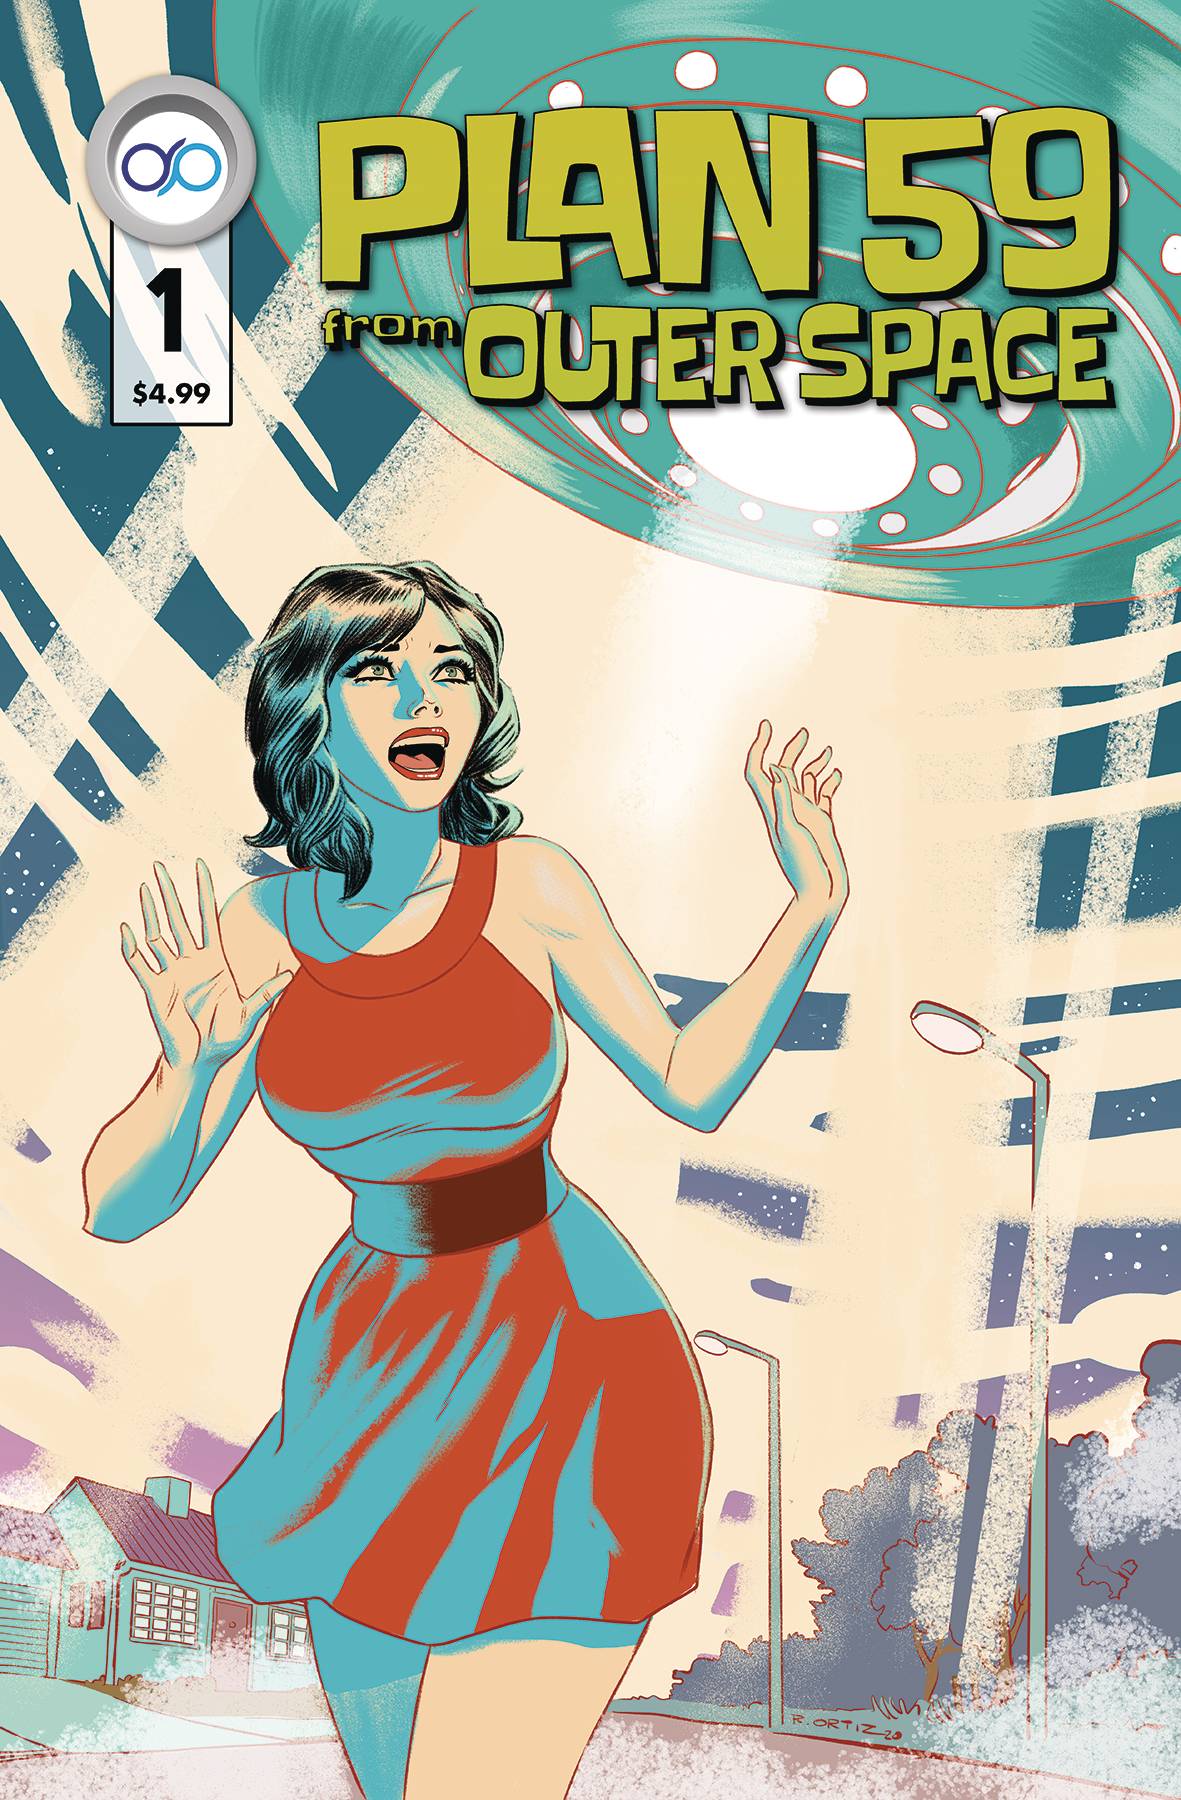 PLAN 59 FROM OUTER SPACE #1 (OF 3) (MR)